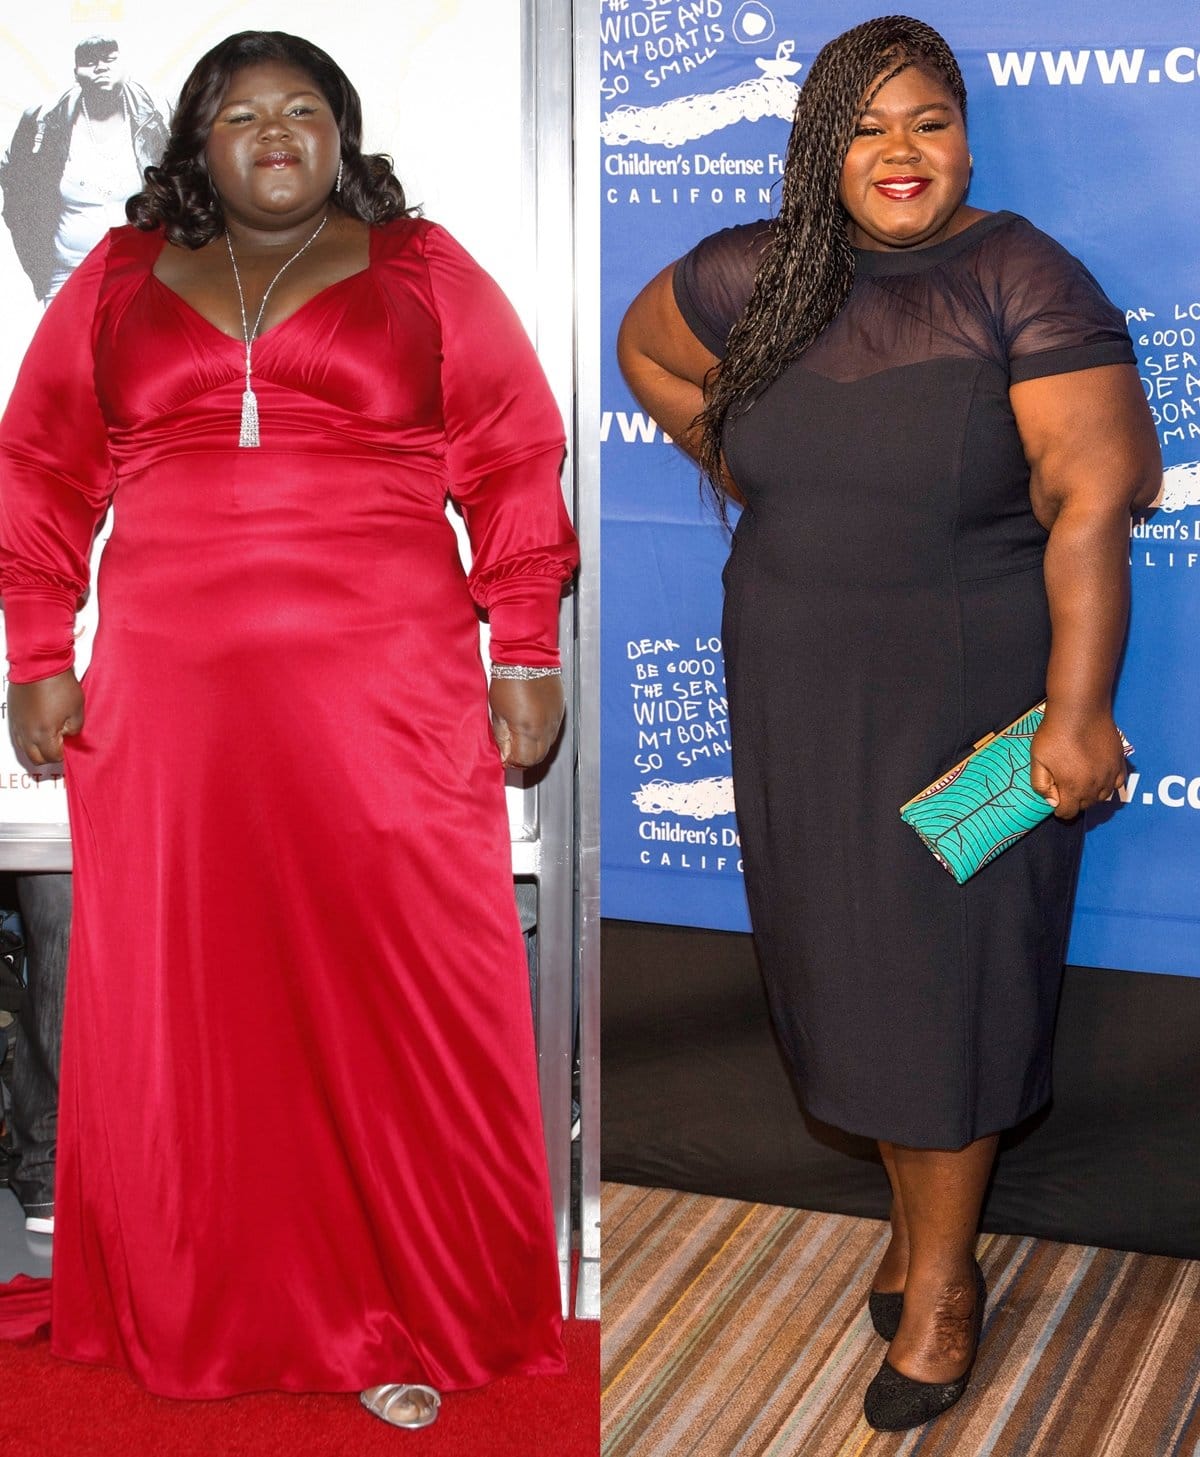 Before and after weight loss: Precious actress Gabourey Sidibe has dropped 150 pounds